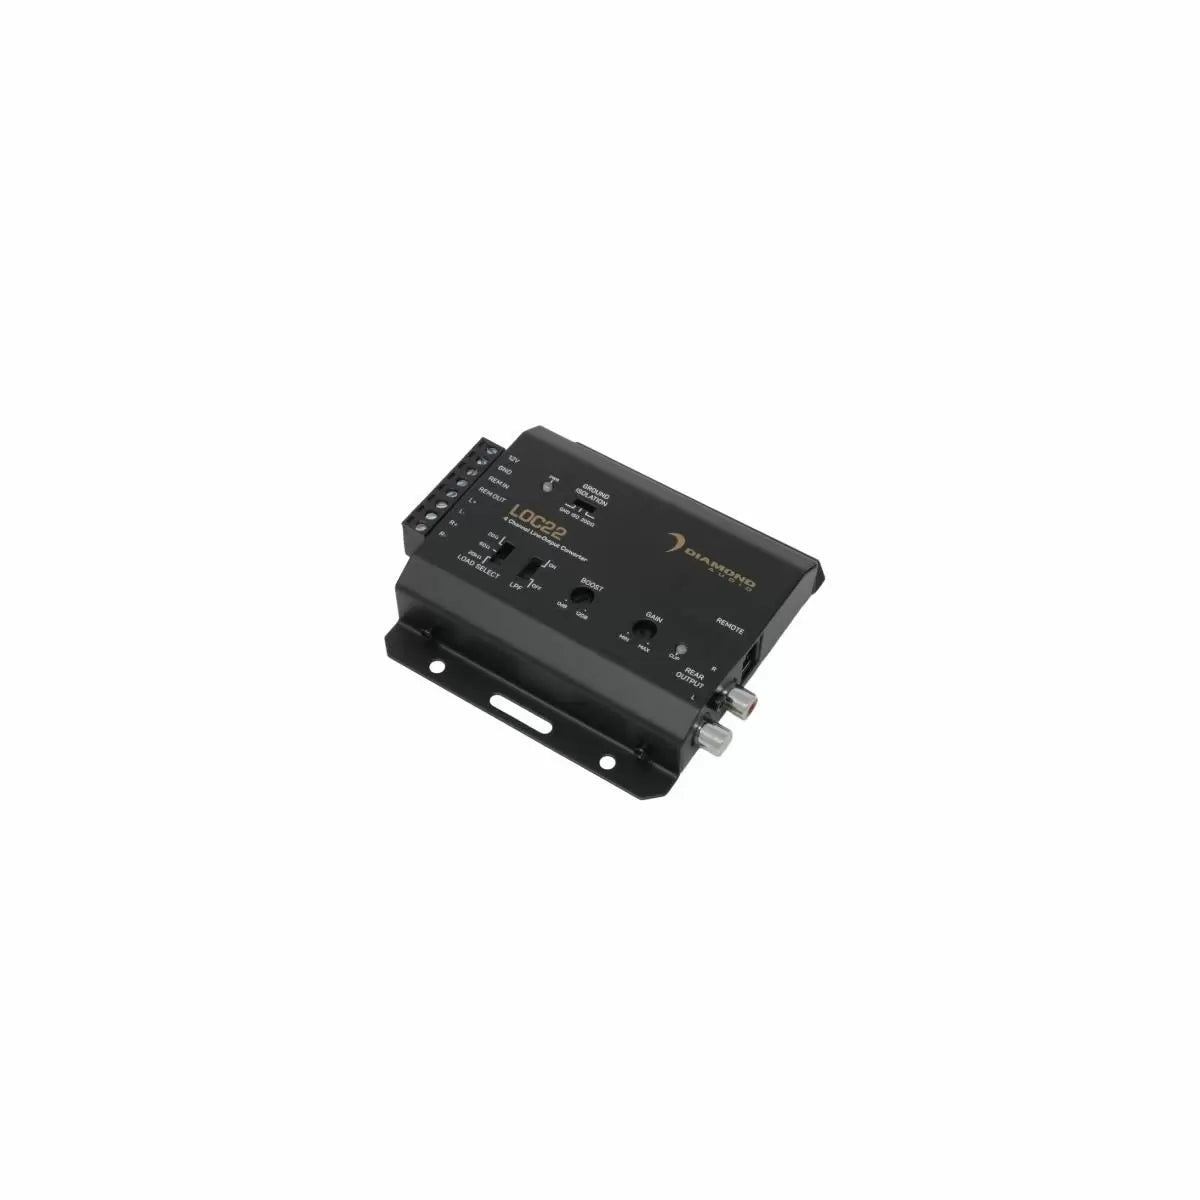 Diamond Audio LOC22 2-Channel (2 IN / 2 OUT) Line-Output Converter